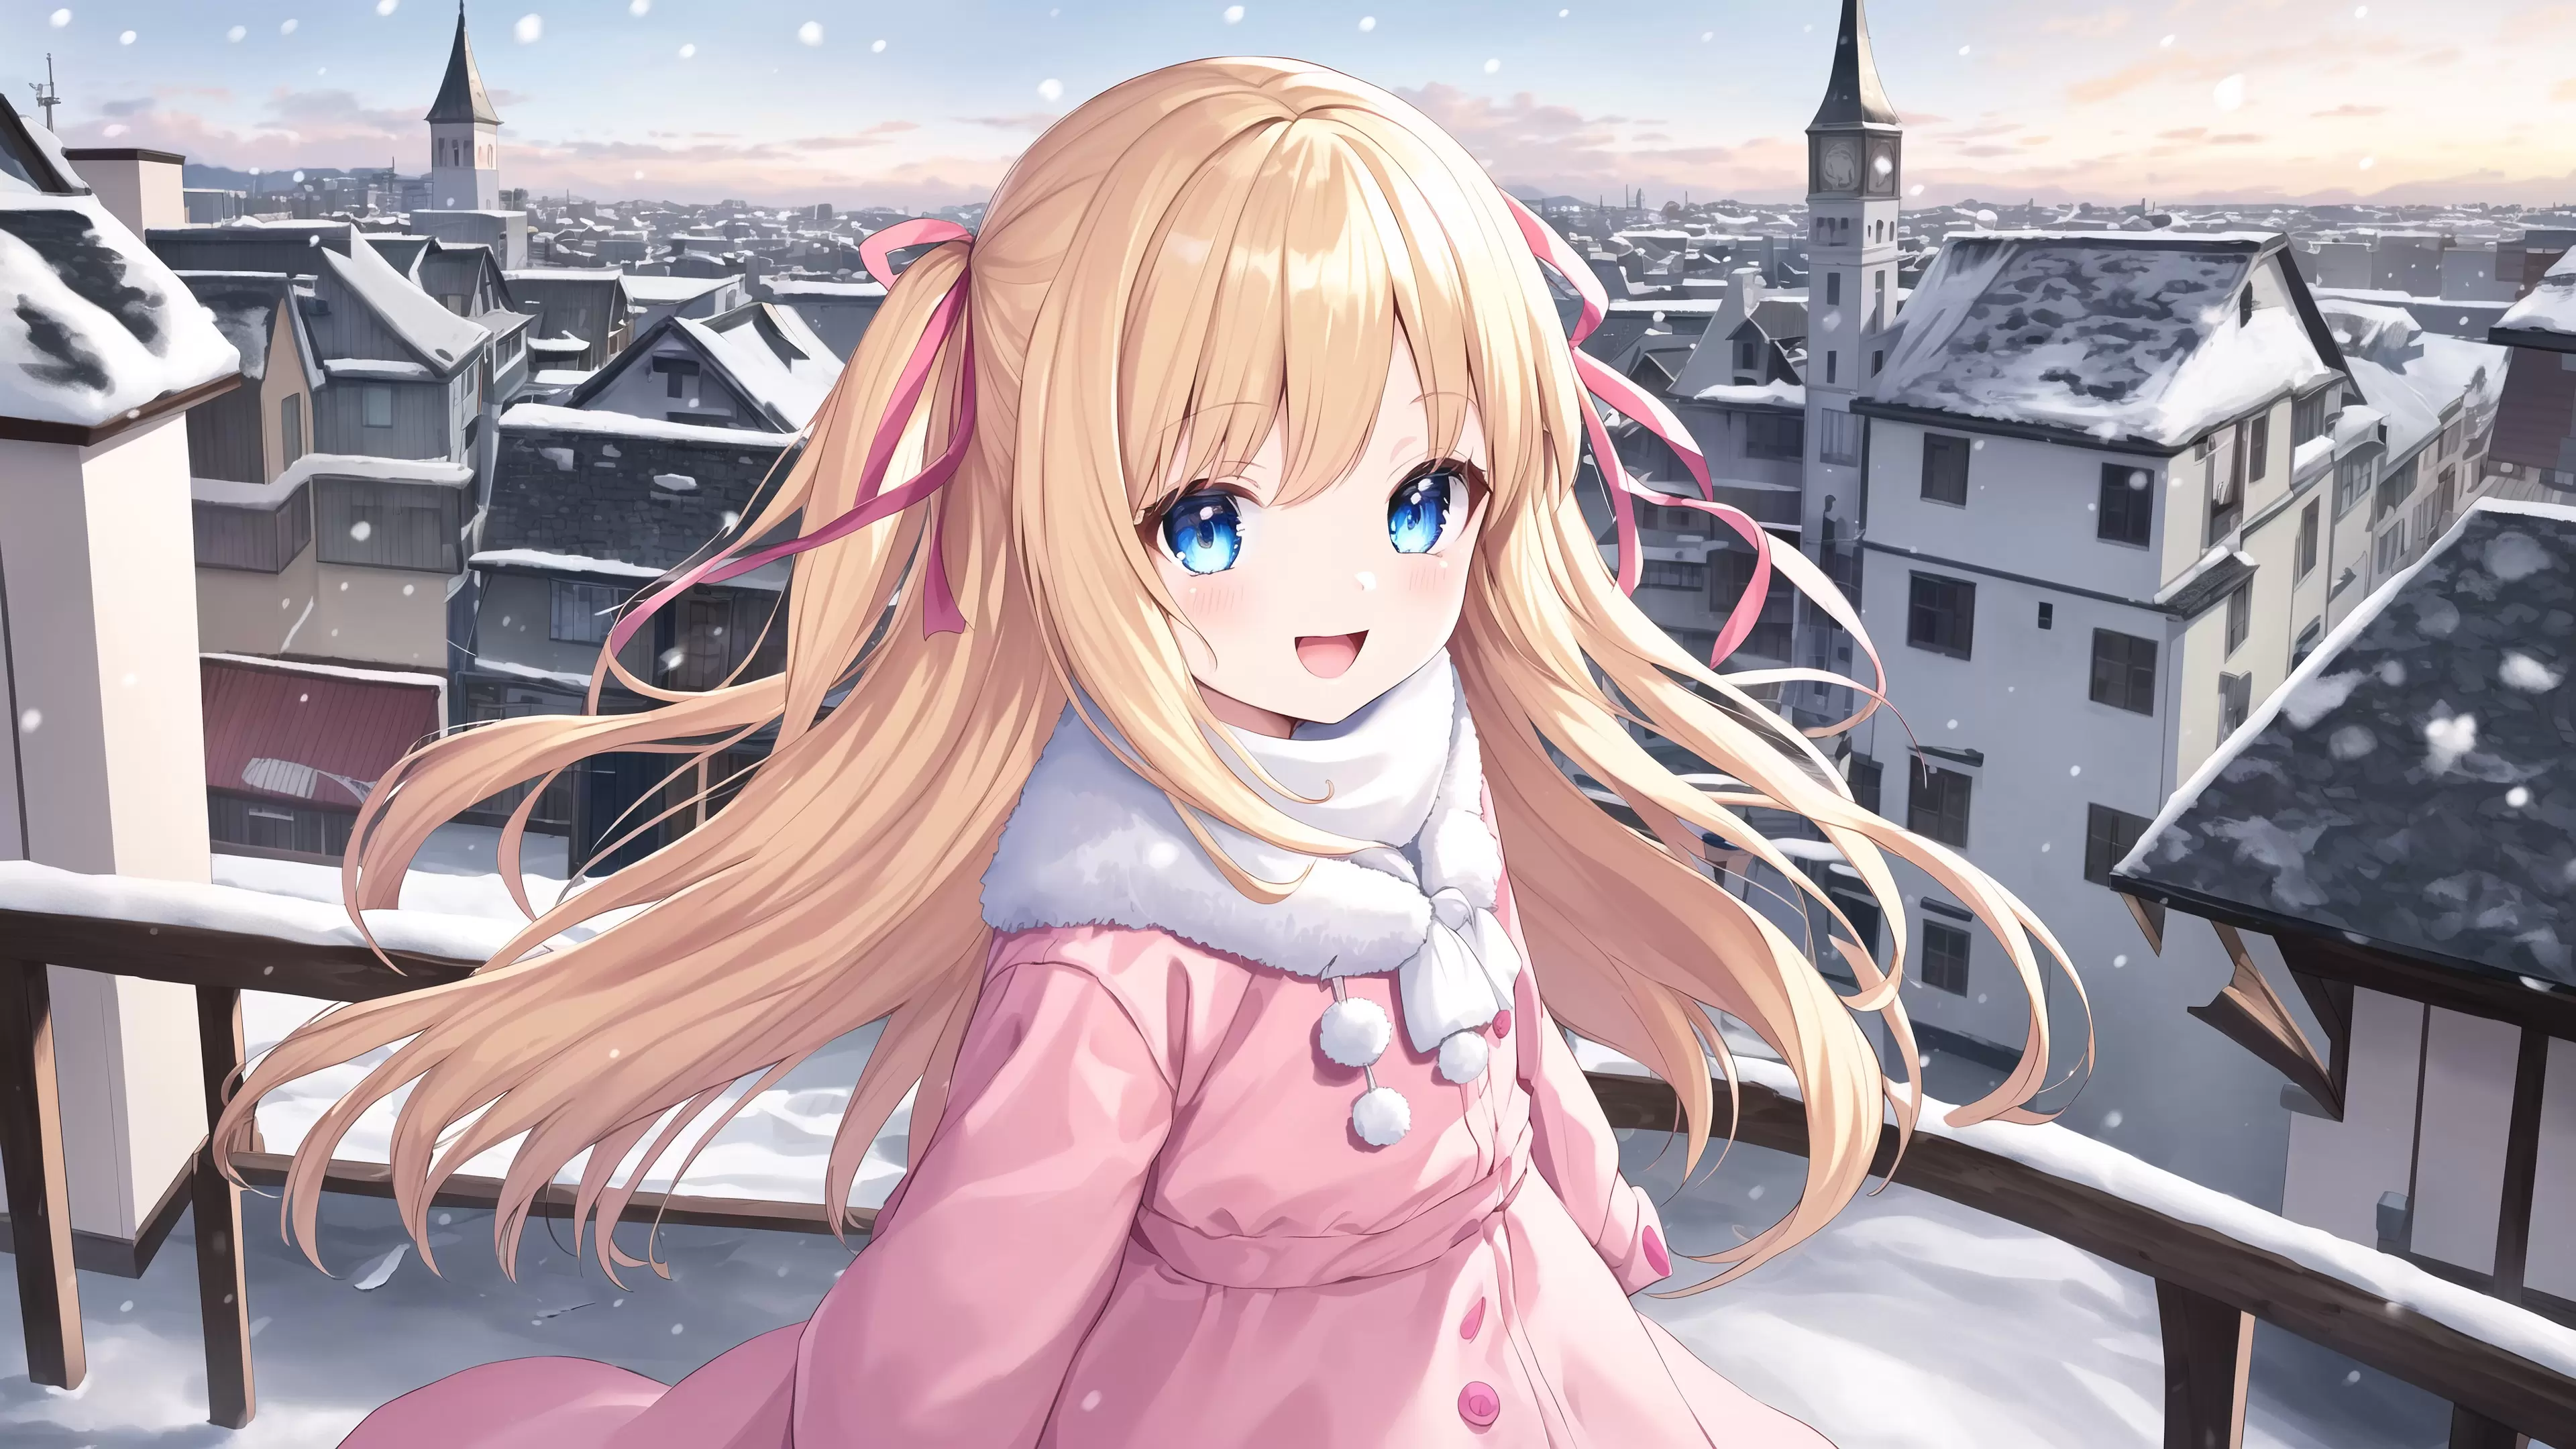 4k Wallpaper Blond Girl Wallpapers Snow City Aipictors